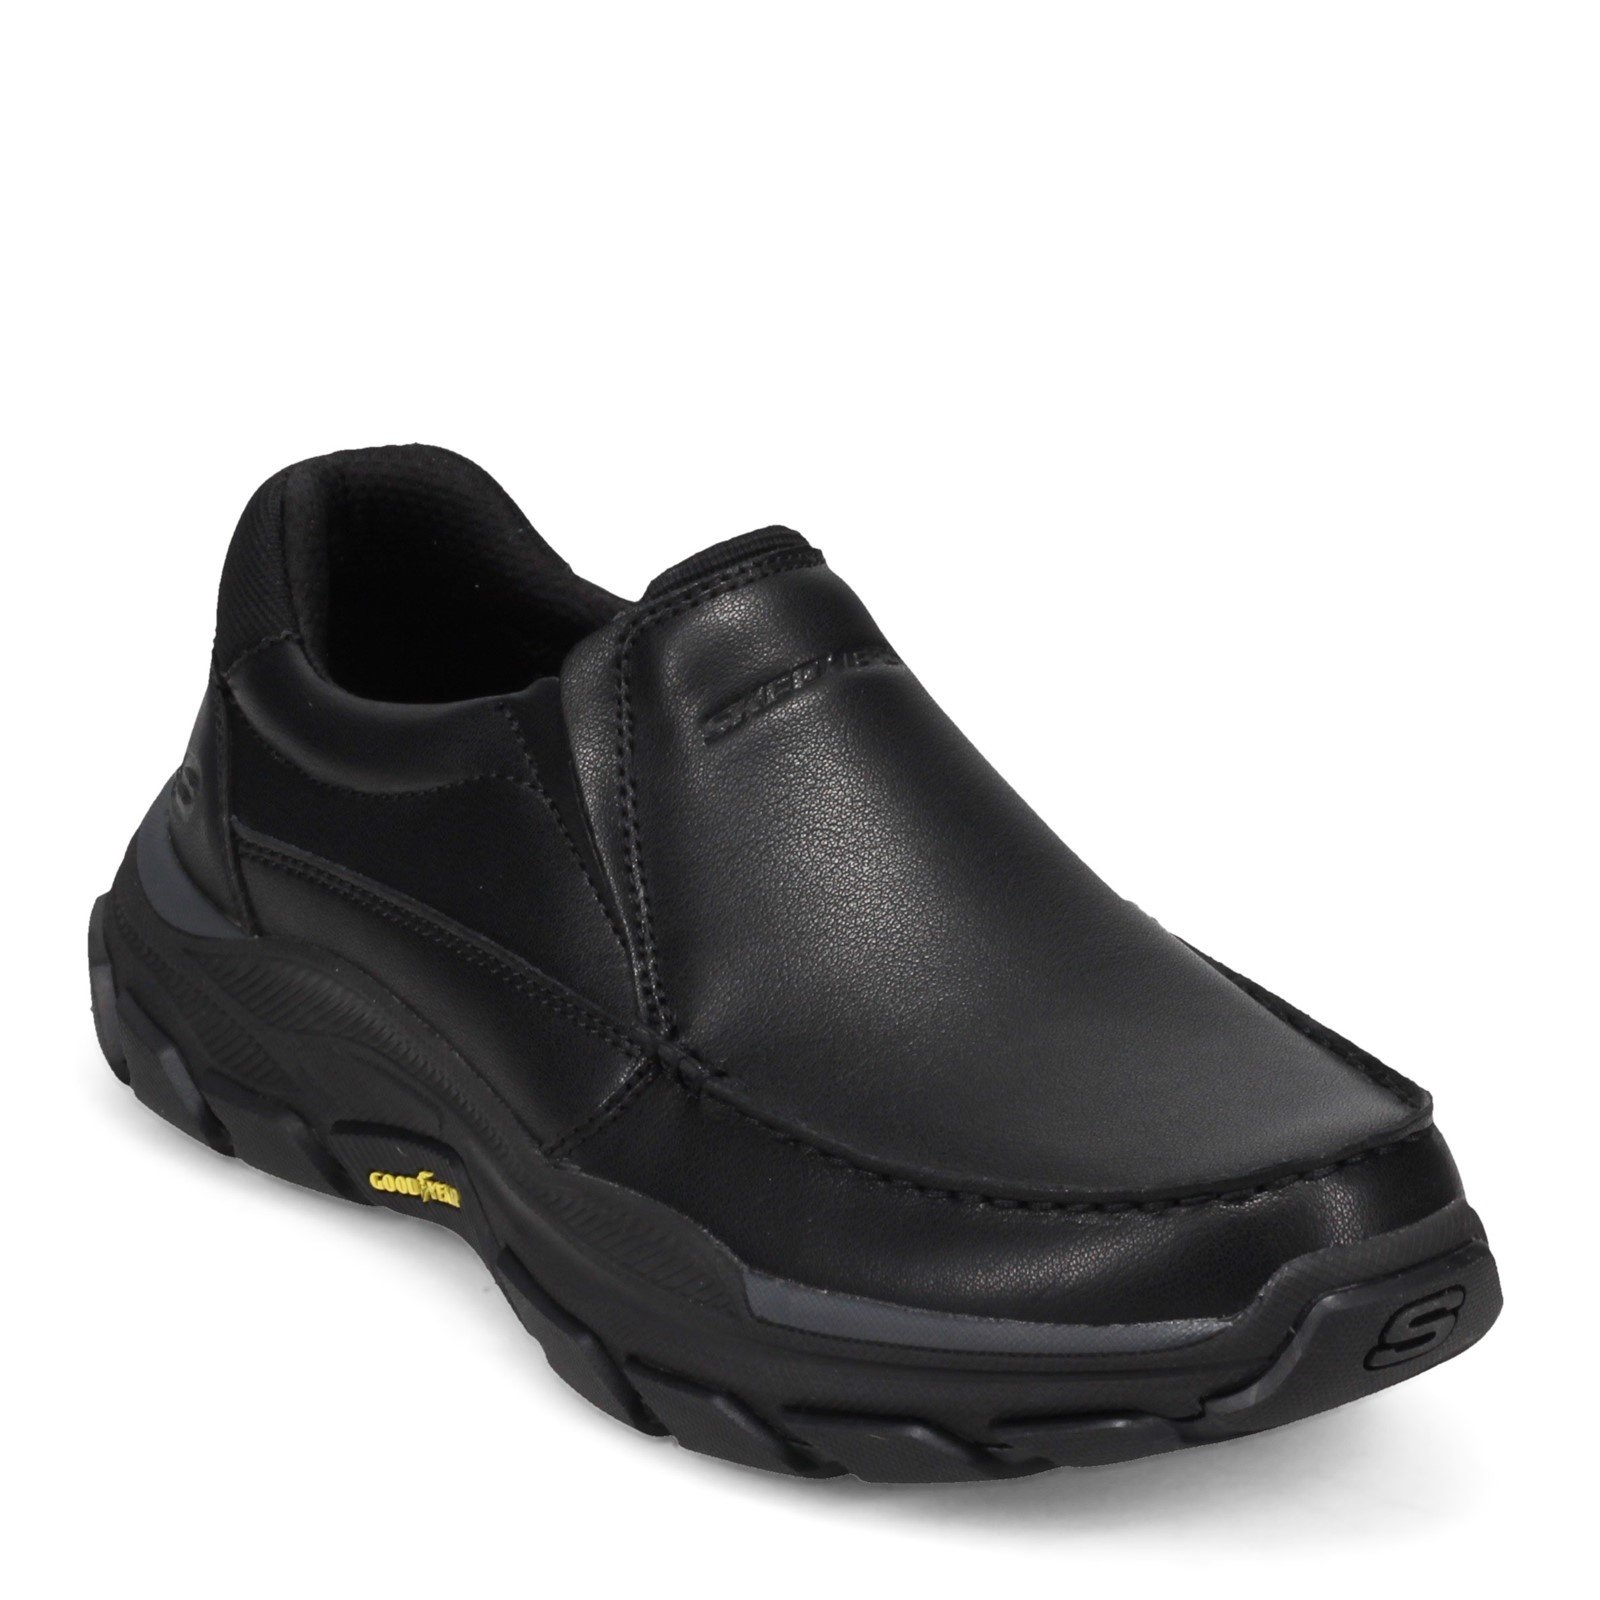 Skechers Men's Relaxed Fit: Respected - Catel Shoe - Traditions ...